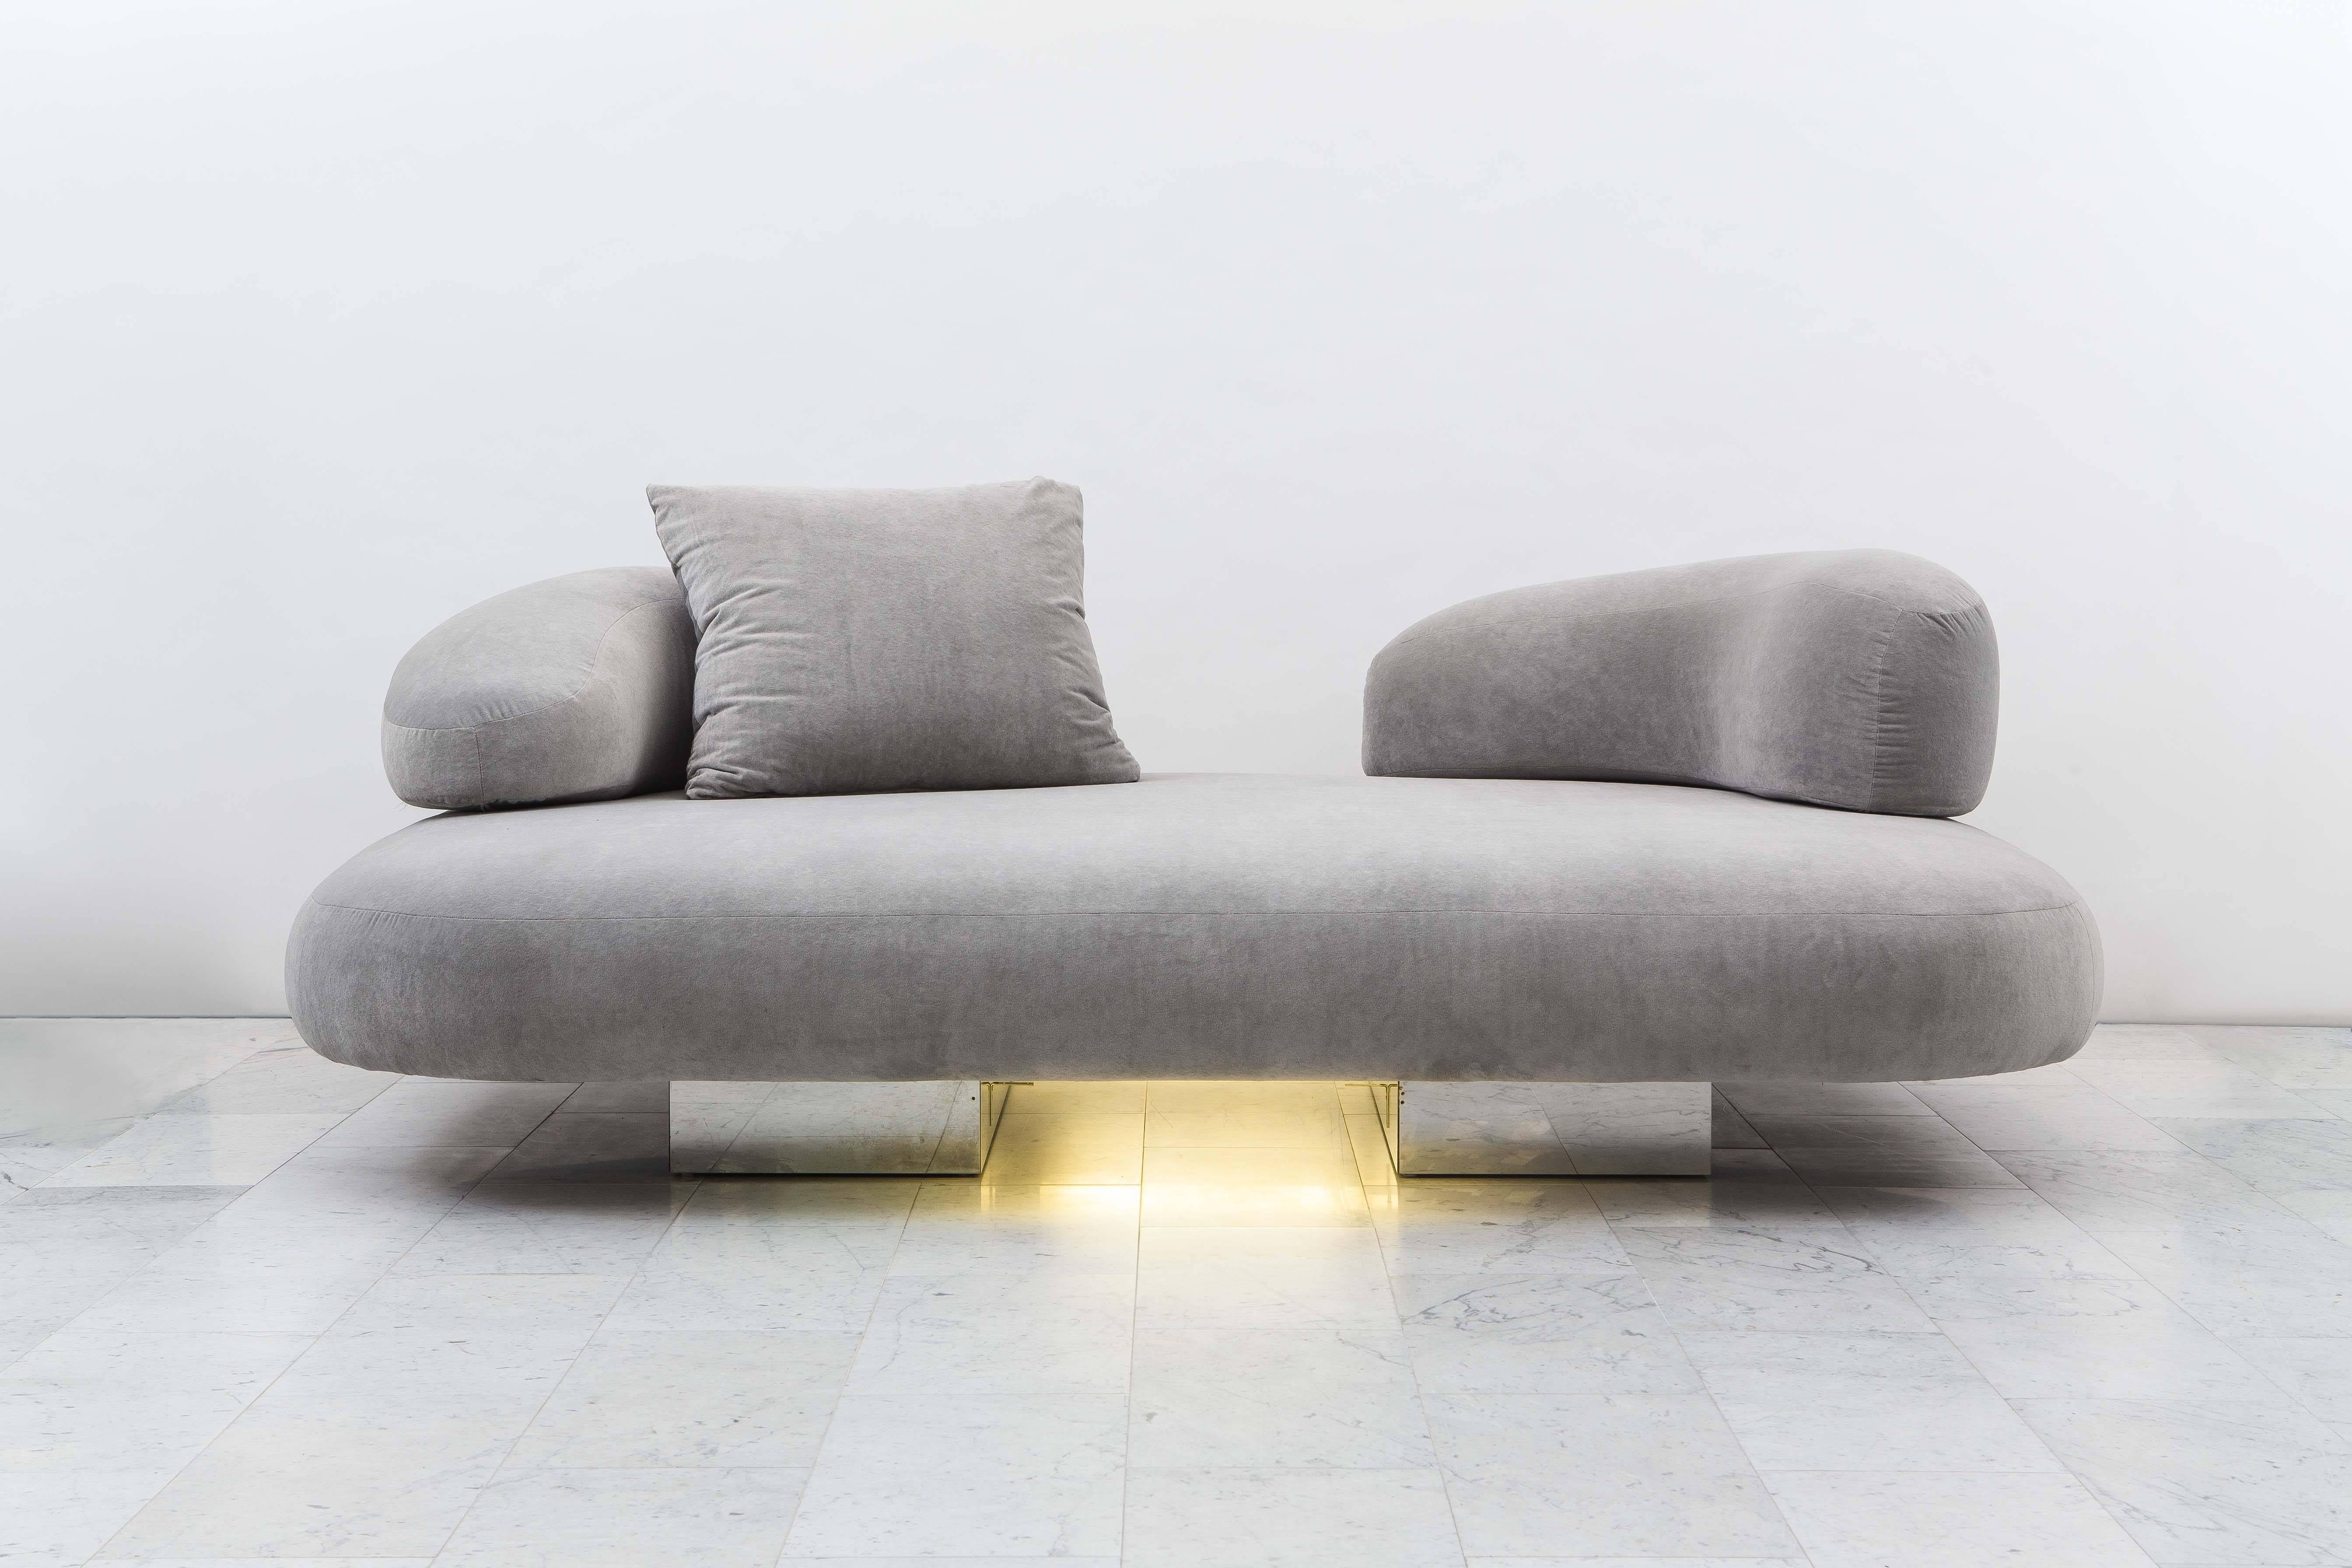 This extra-wide, racetrack shaped-sofa is a rare pre-curser to the final creations made in the 1980s at the end of Evan’s prolific career. Made with architectural and futuristic furniture elements, the voluminous sofa features crescent shaped